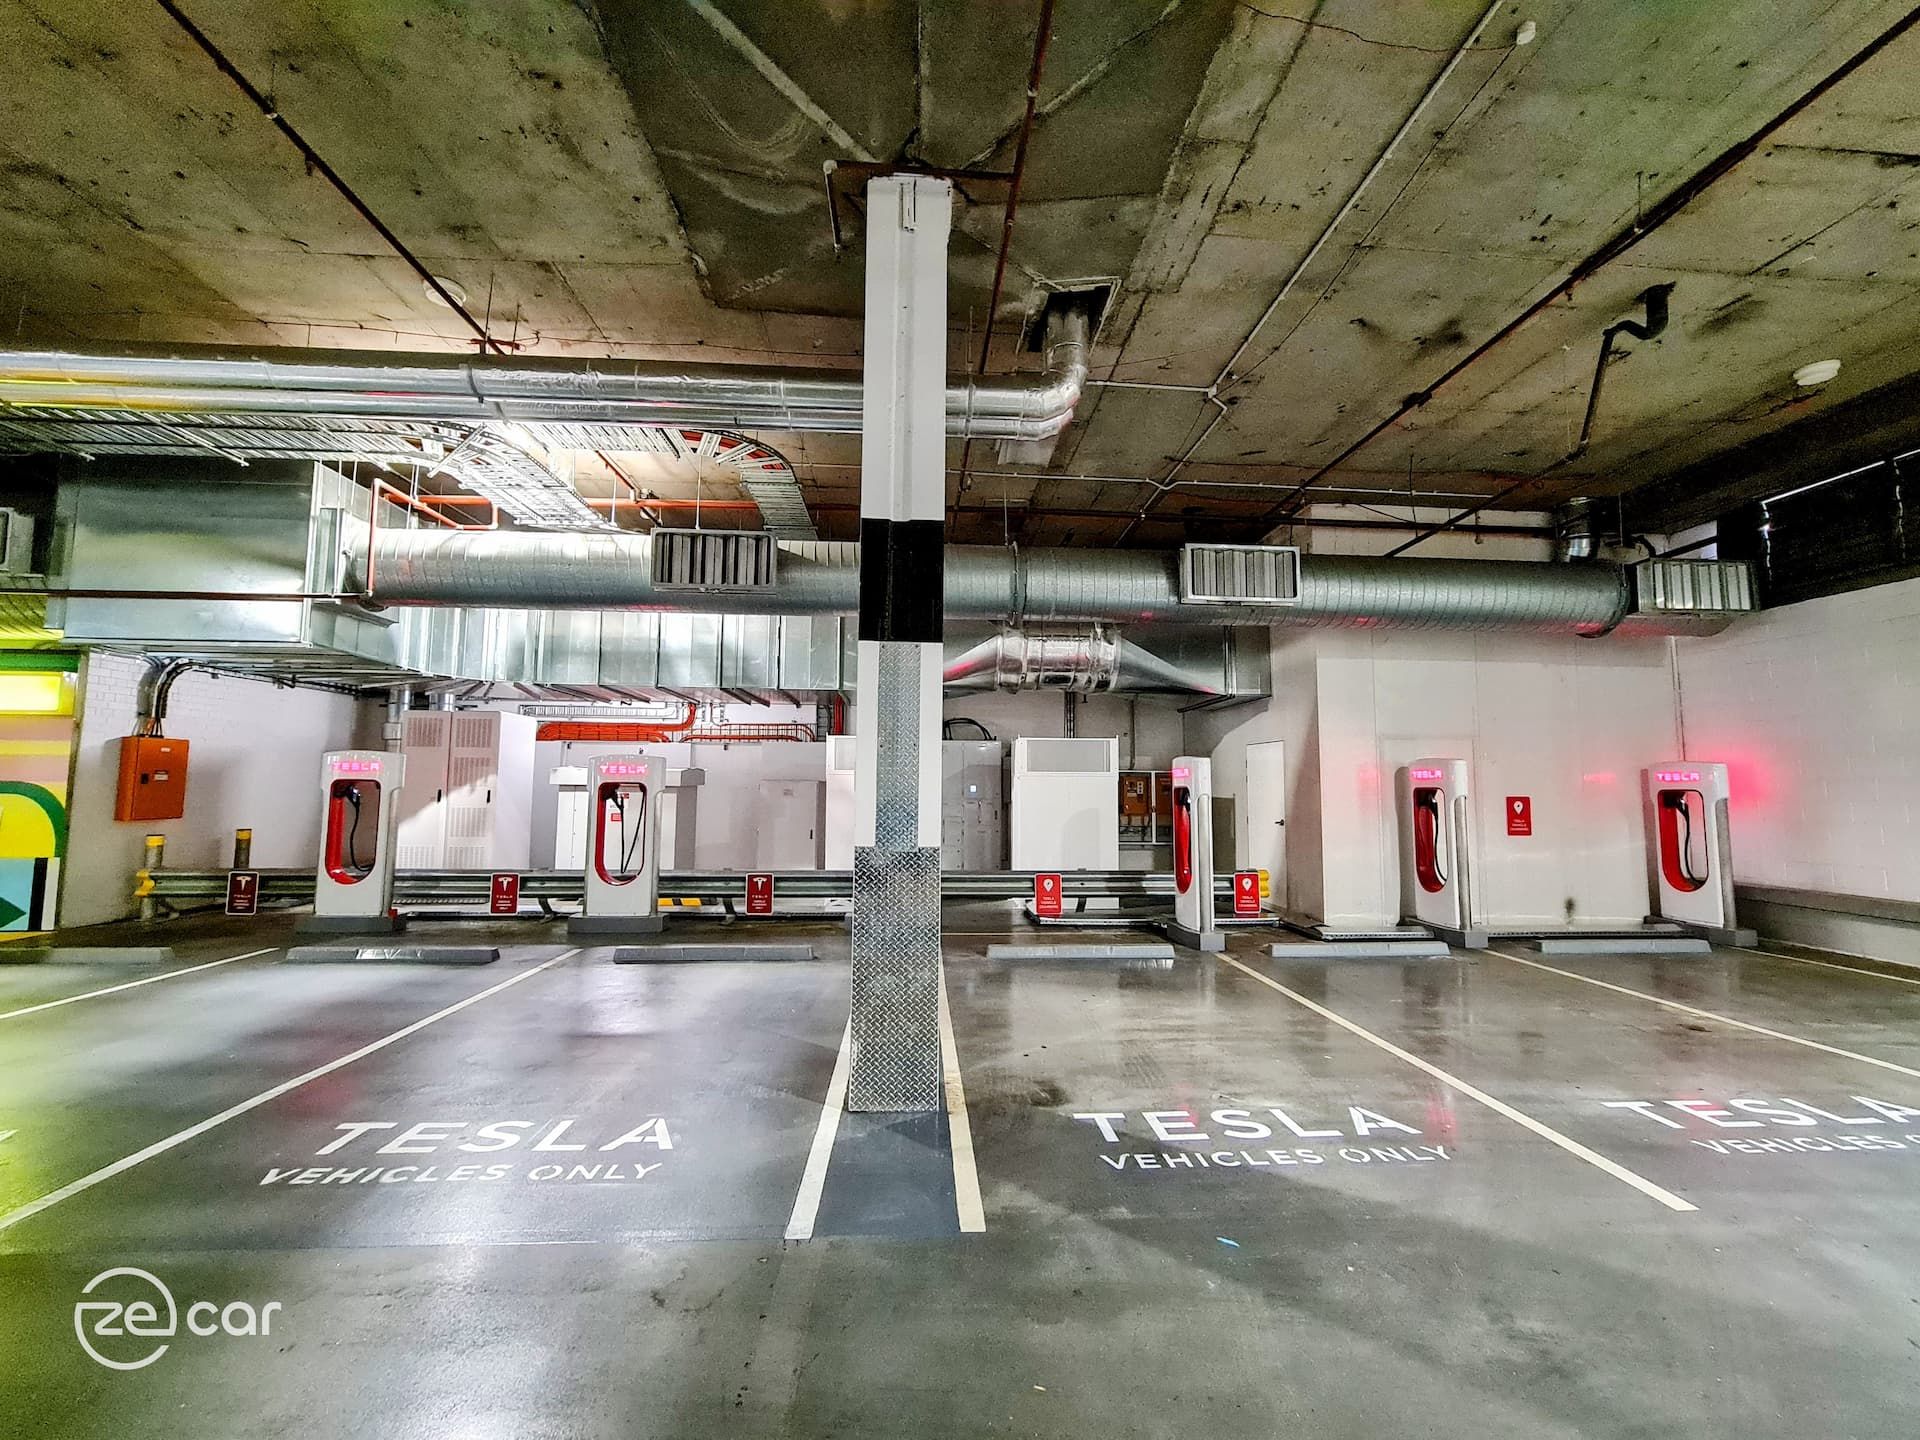 Six V3 Tesla Superchargers in Toombul car park